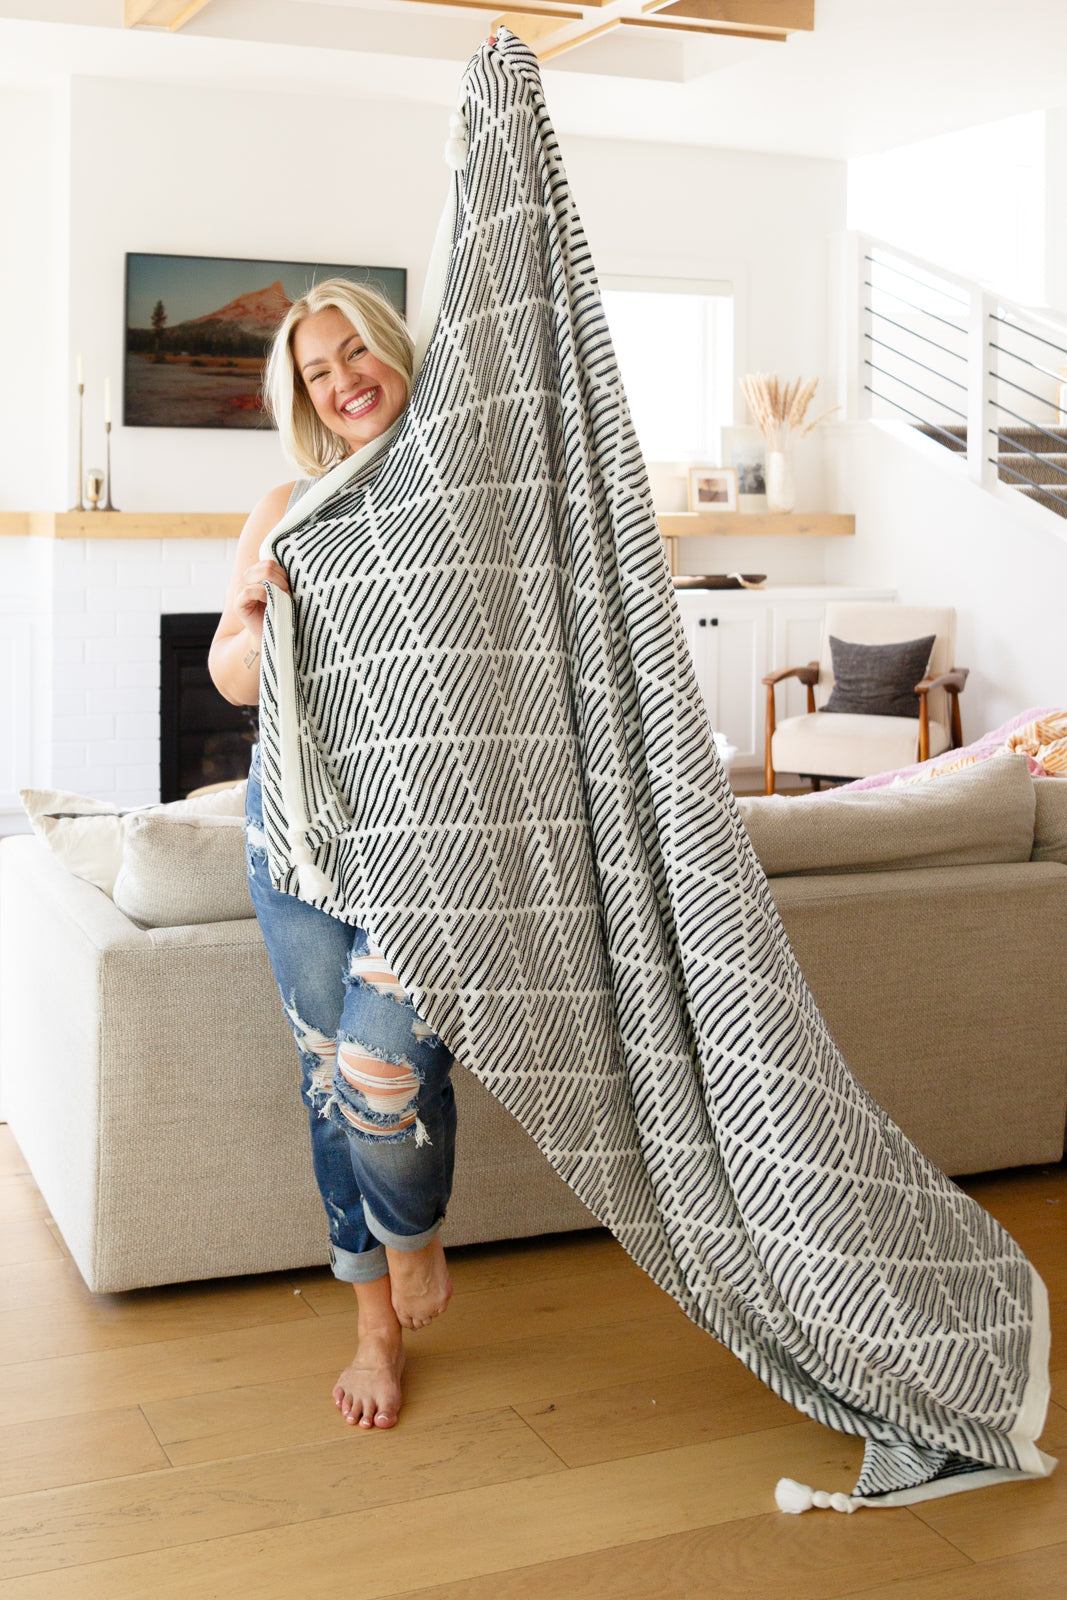 Elevate your home decor this fall with these soft and trendy tassel blankets from Cuddle Culture! Available in a black and white stripe texture with a stunning geometric design and tassel accent on all four corners.